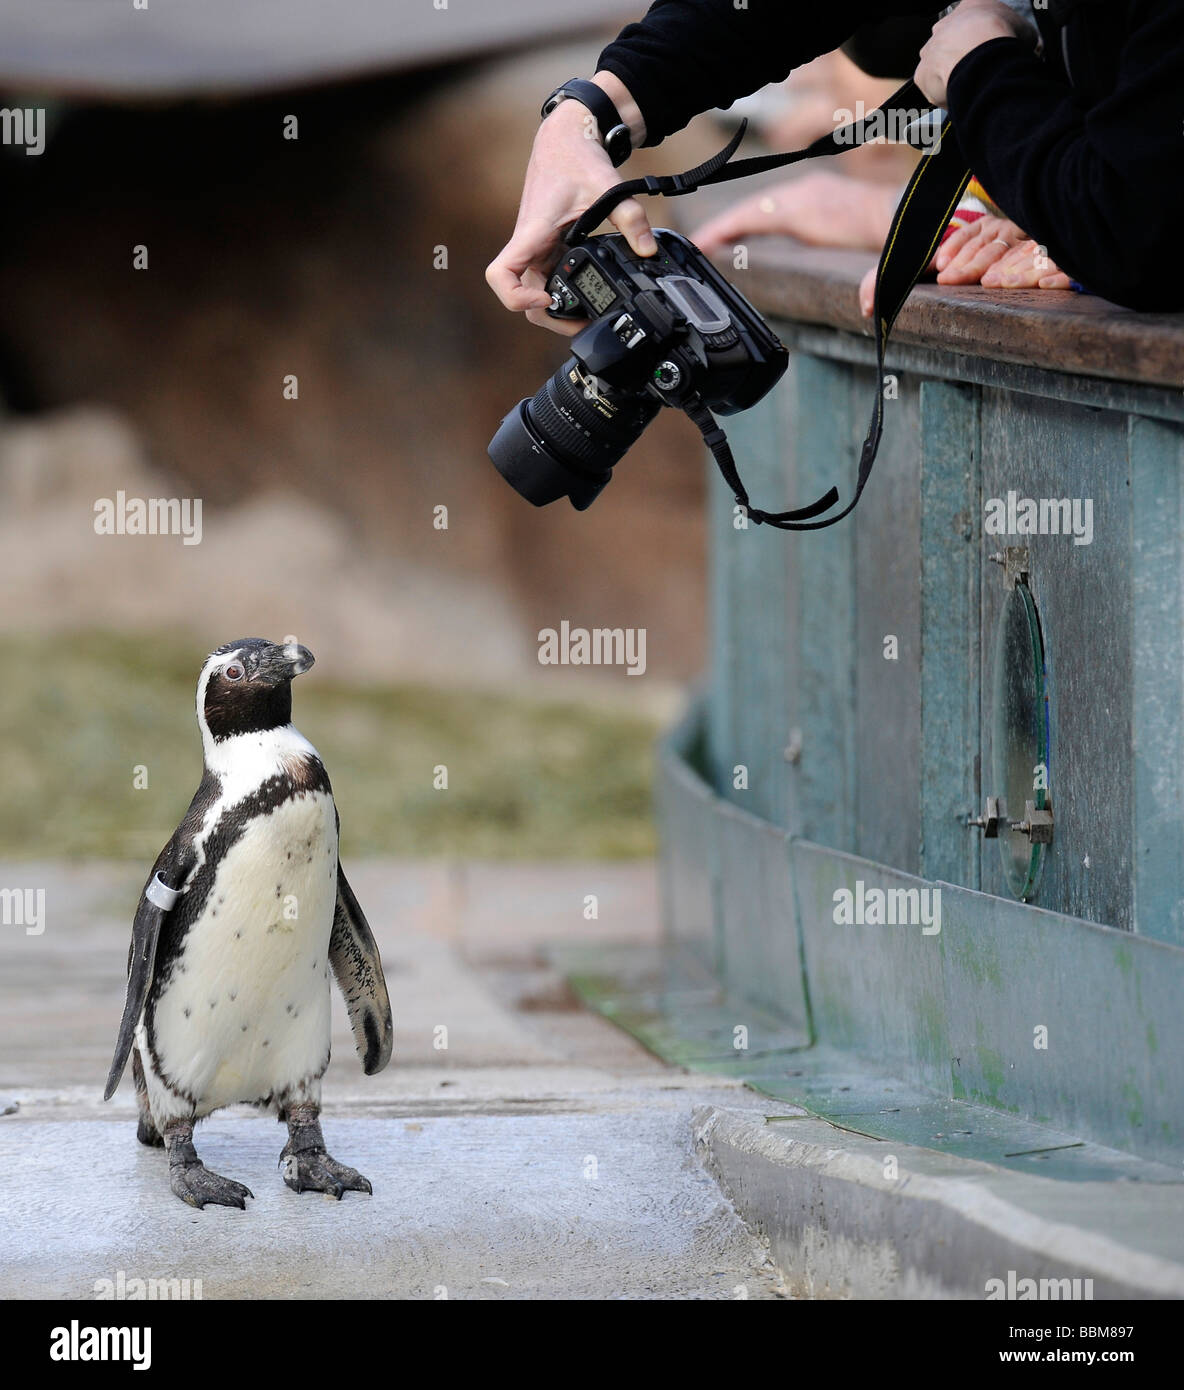 Visitor of an animal park photographing an African Penguin, Black-footed Penguin or Jackass Penguin (Spheniscus demersus) Stock Photo